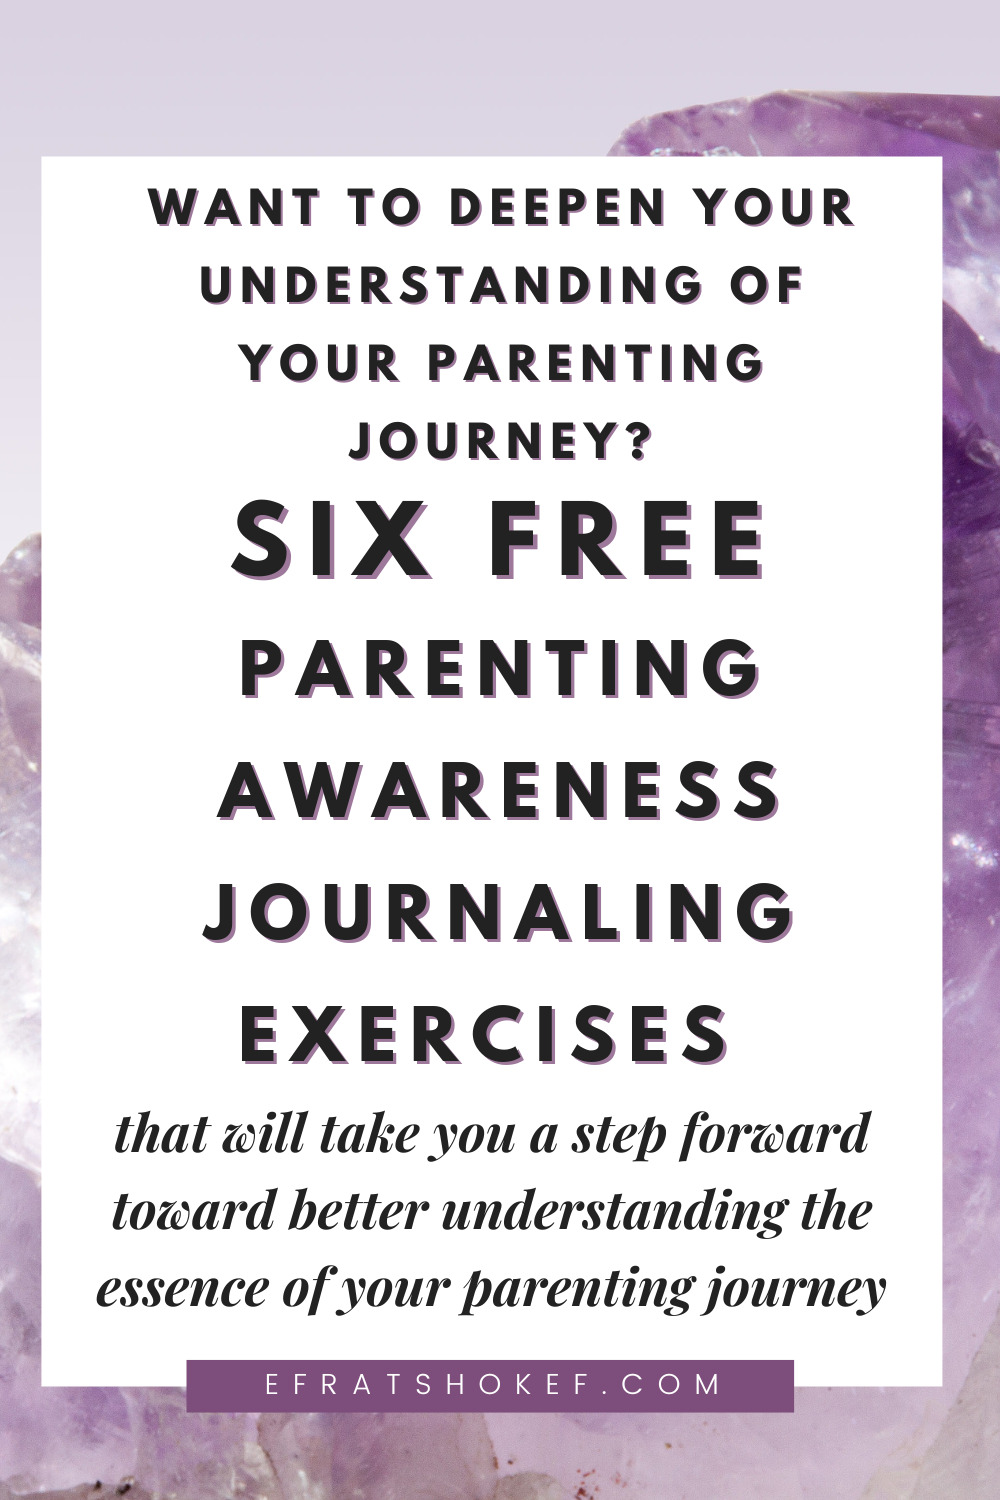 Parenting Awareness Journaling Exercises to enhance your Parenting Journey